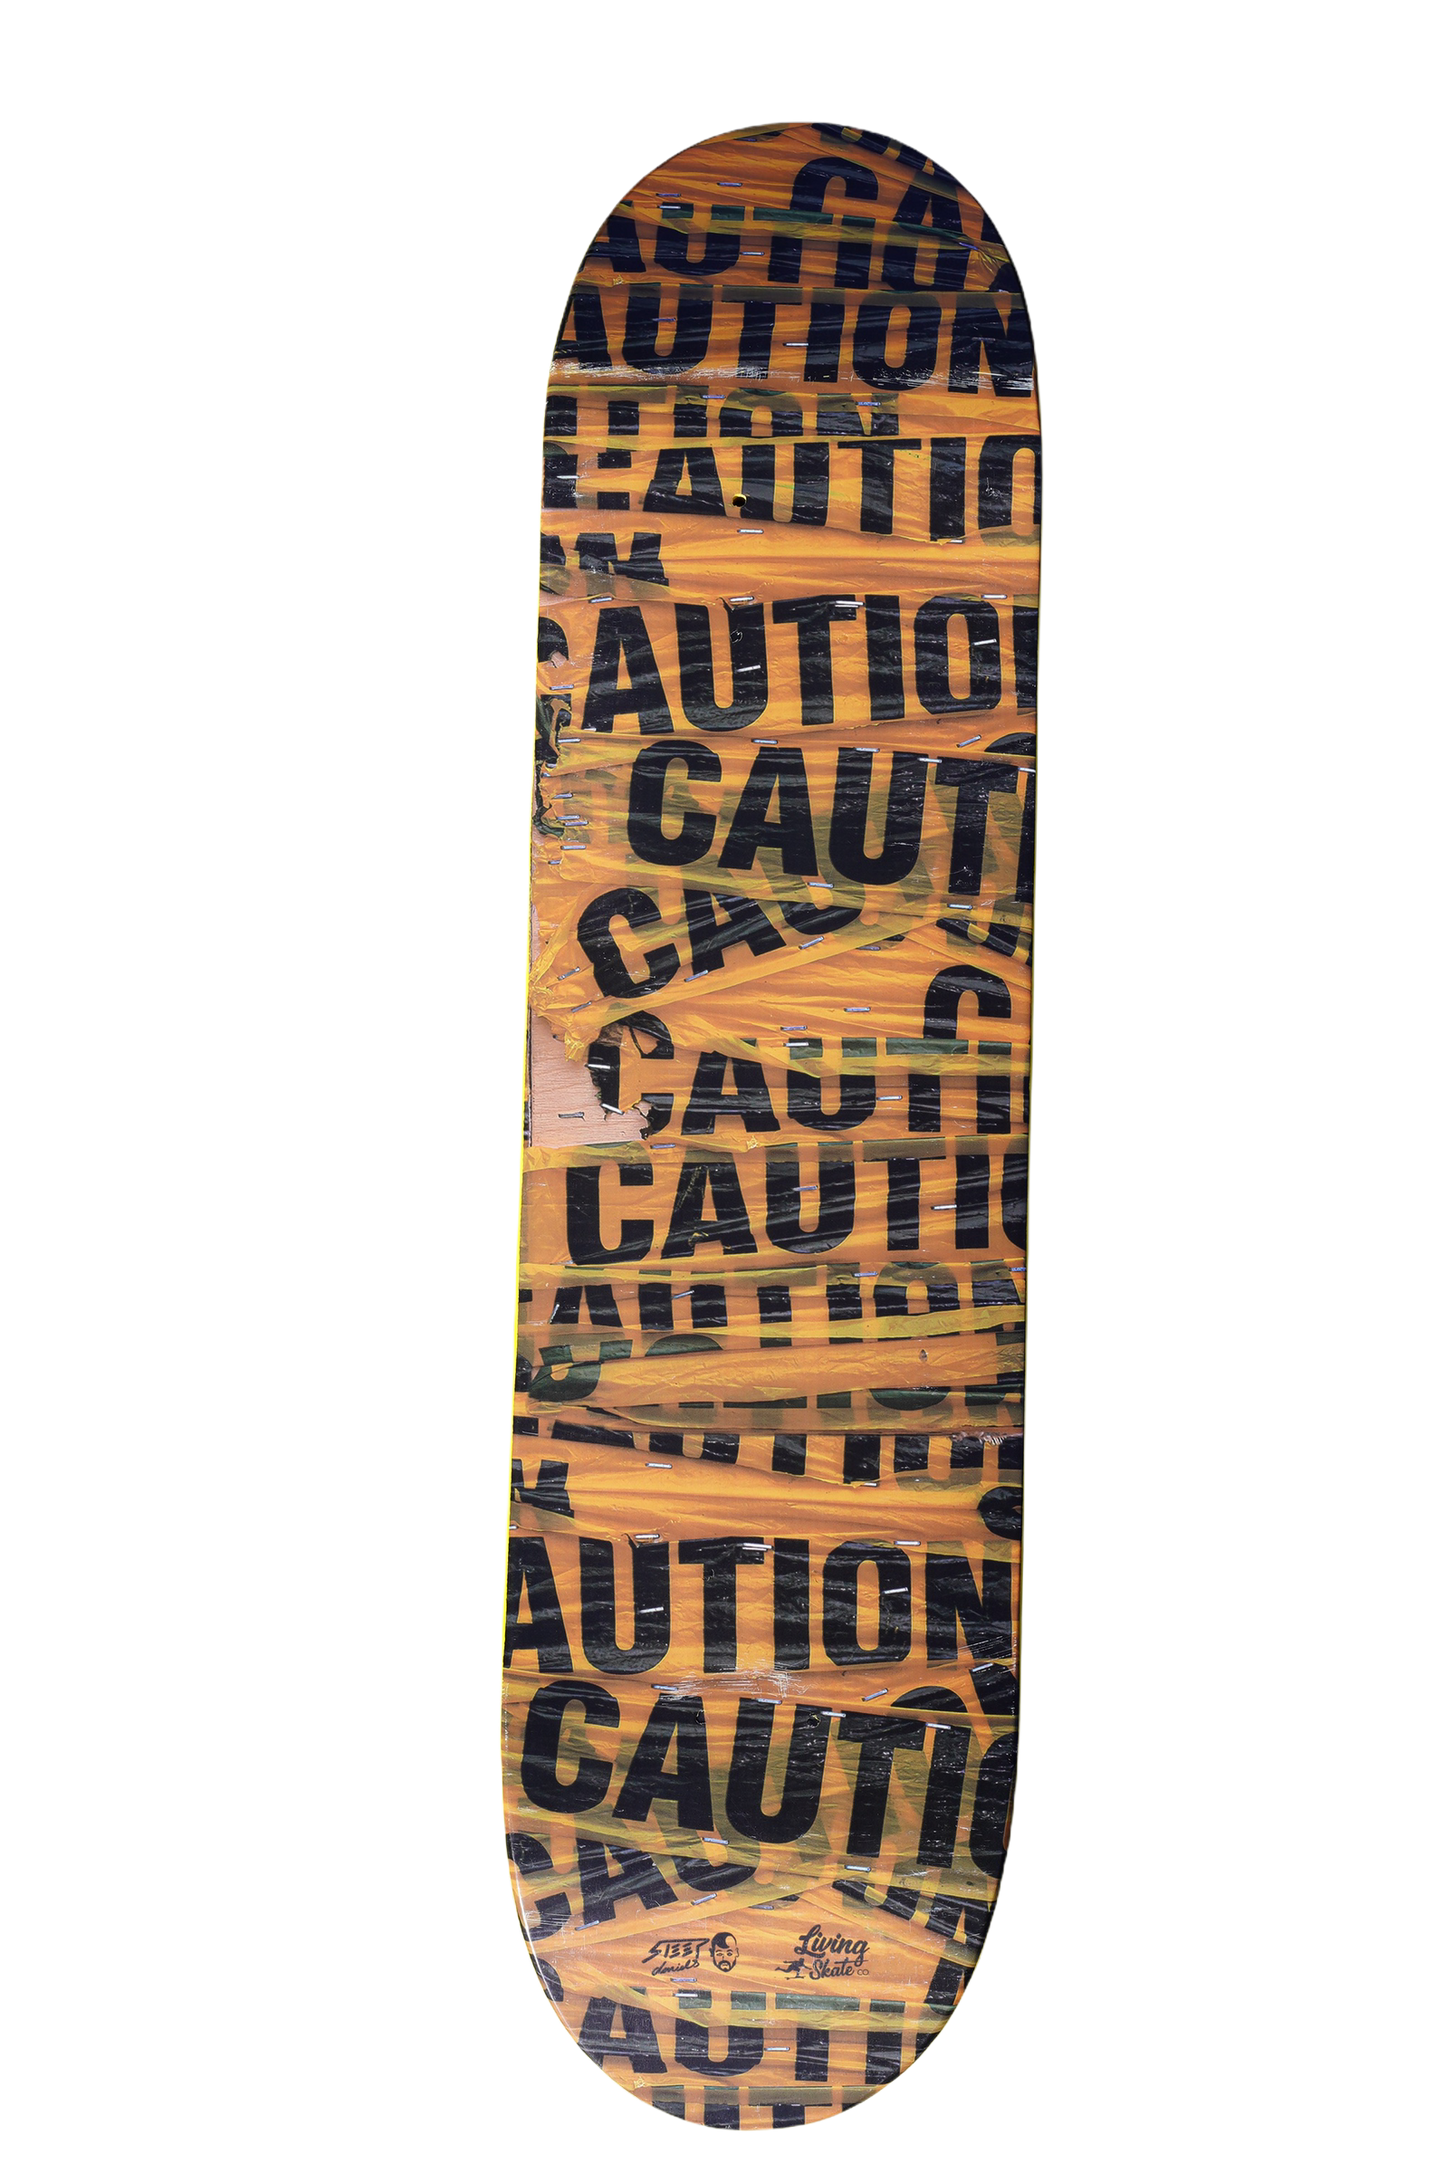 7.77" Caution Couture Edition Skateboard Deck by 777OV